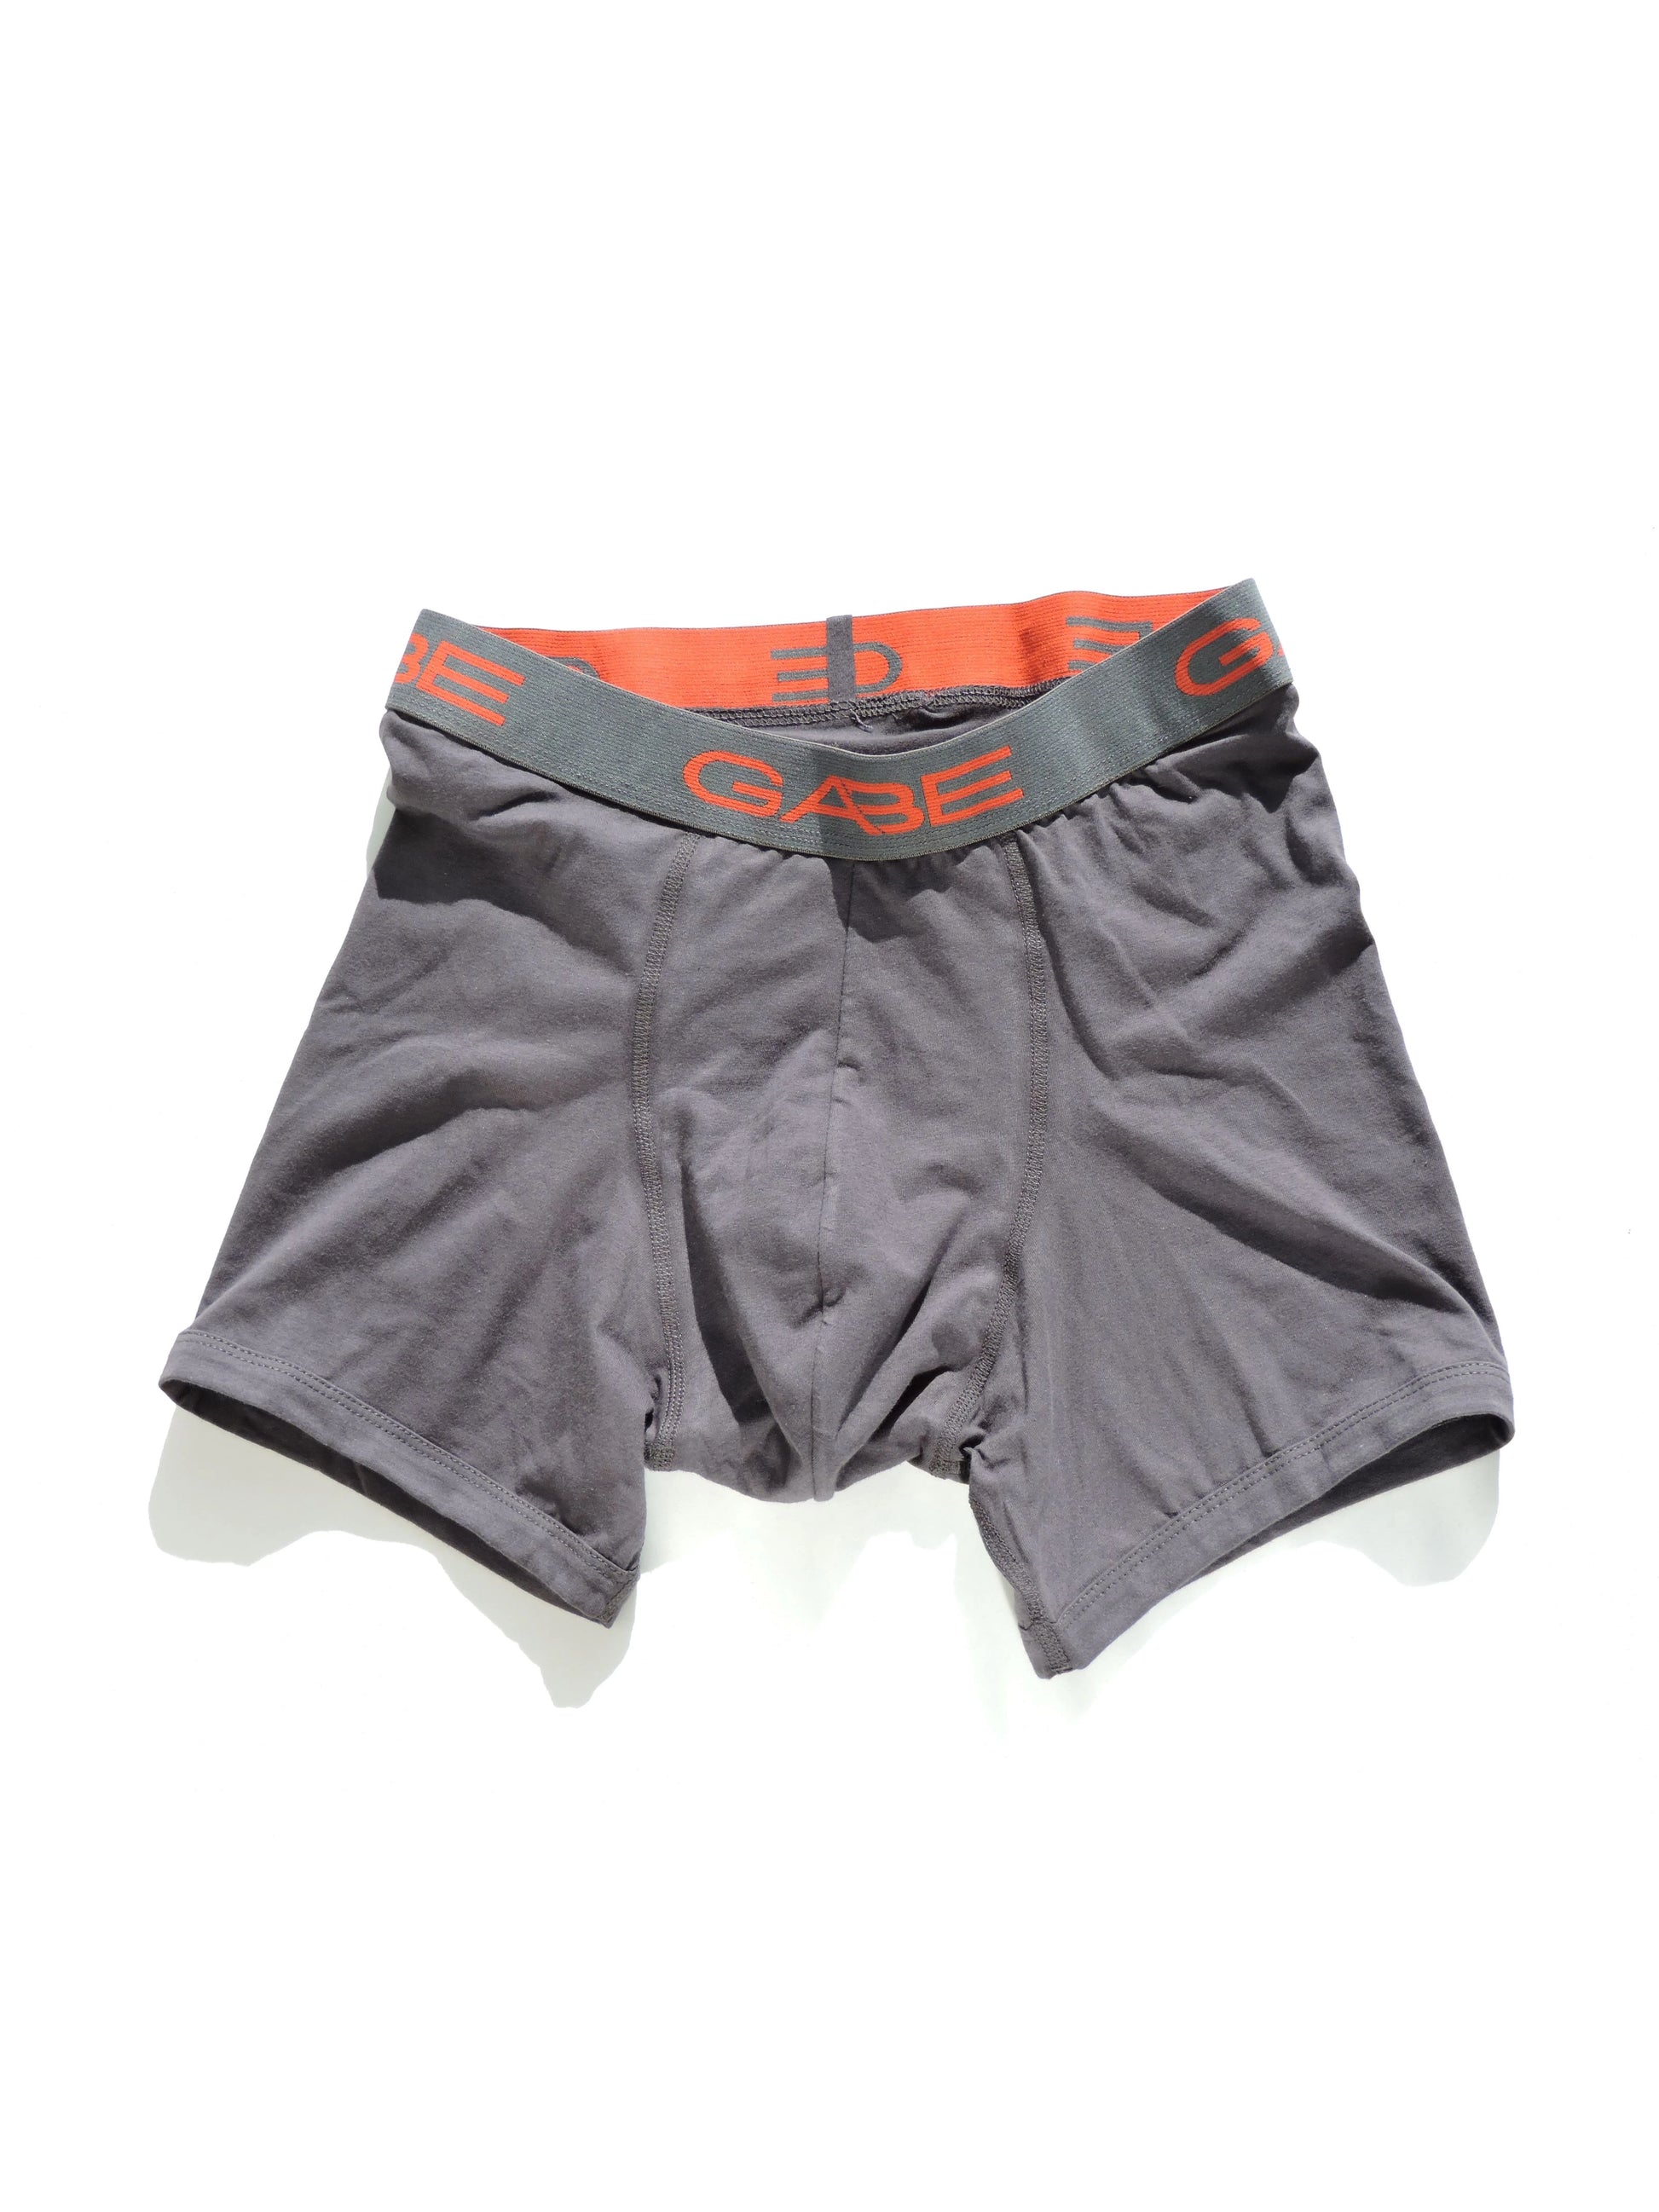 Buy FASO Outer Eastic Briefs at the Best Price in India